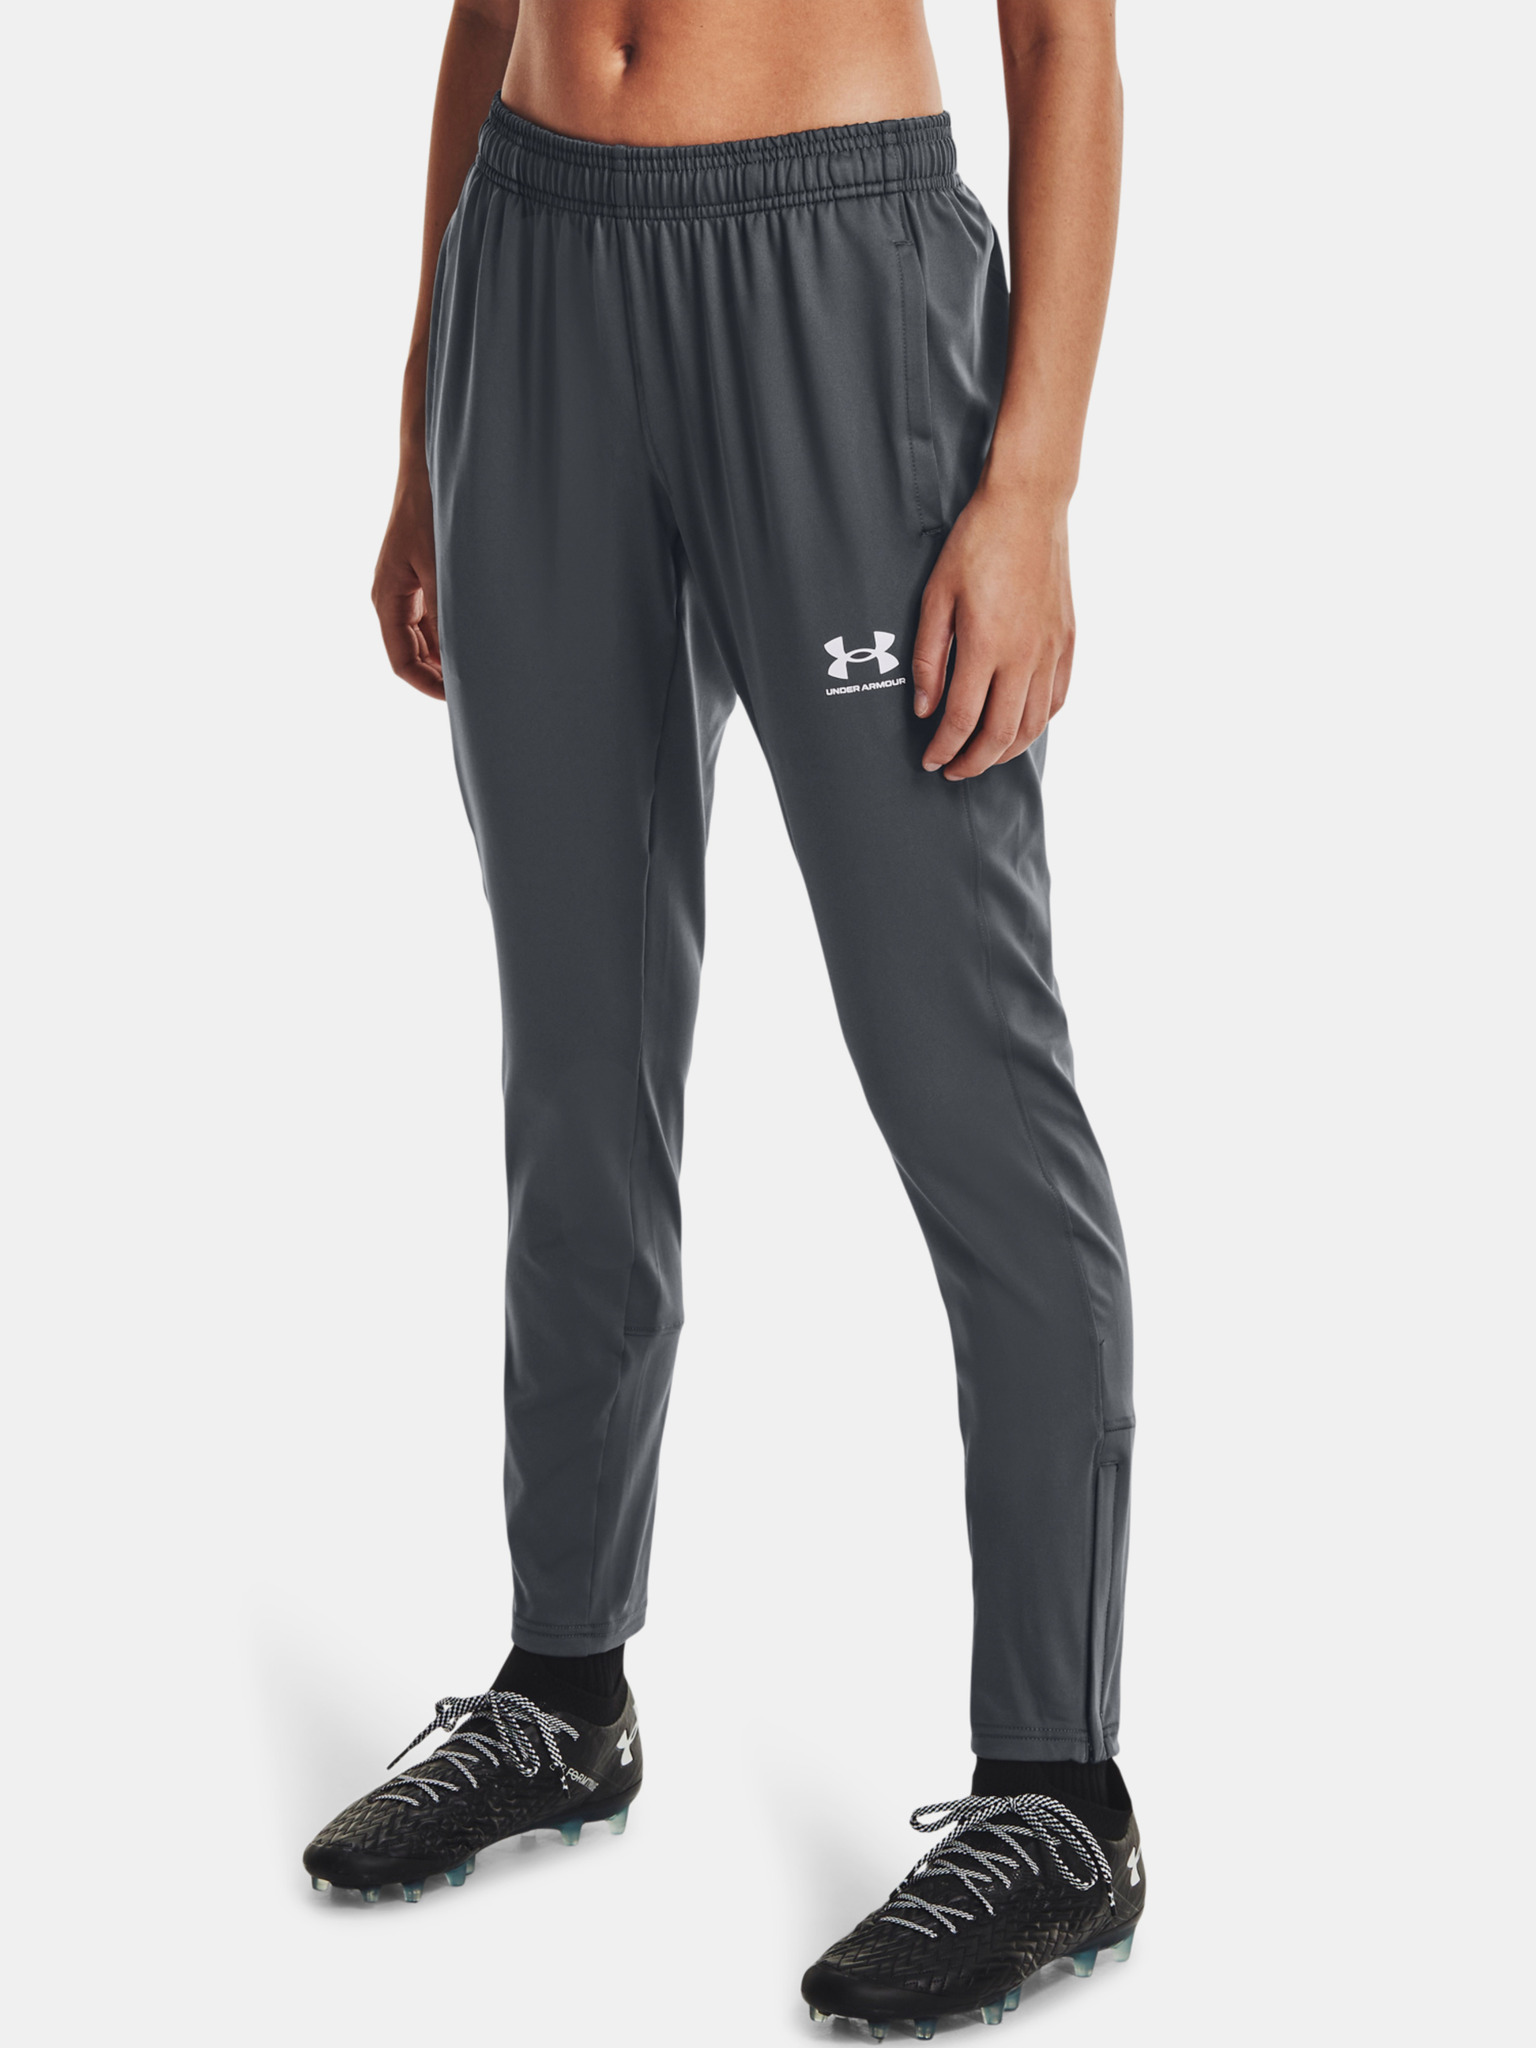 W Challenger Training Pant-GRY Kalhoty Under Armour